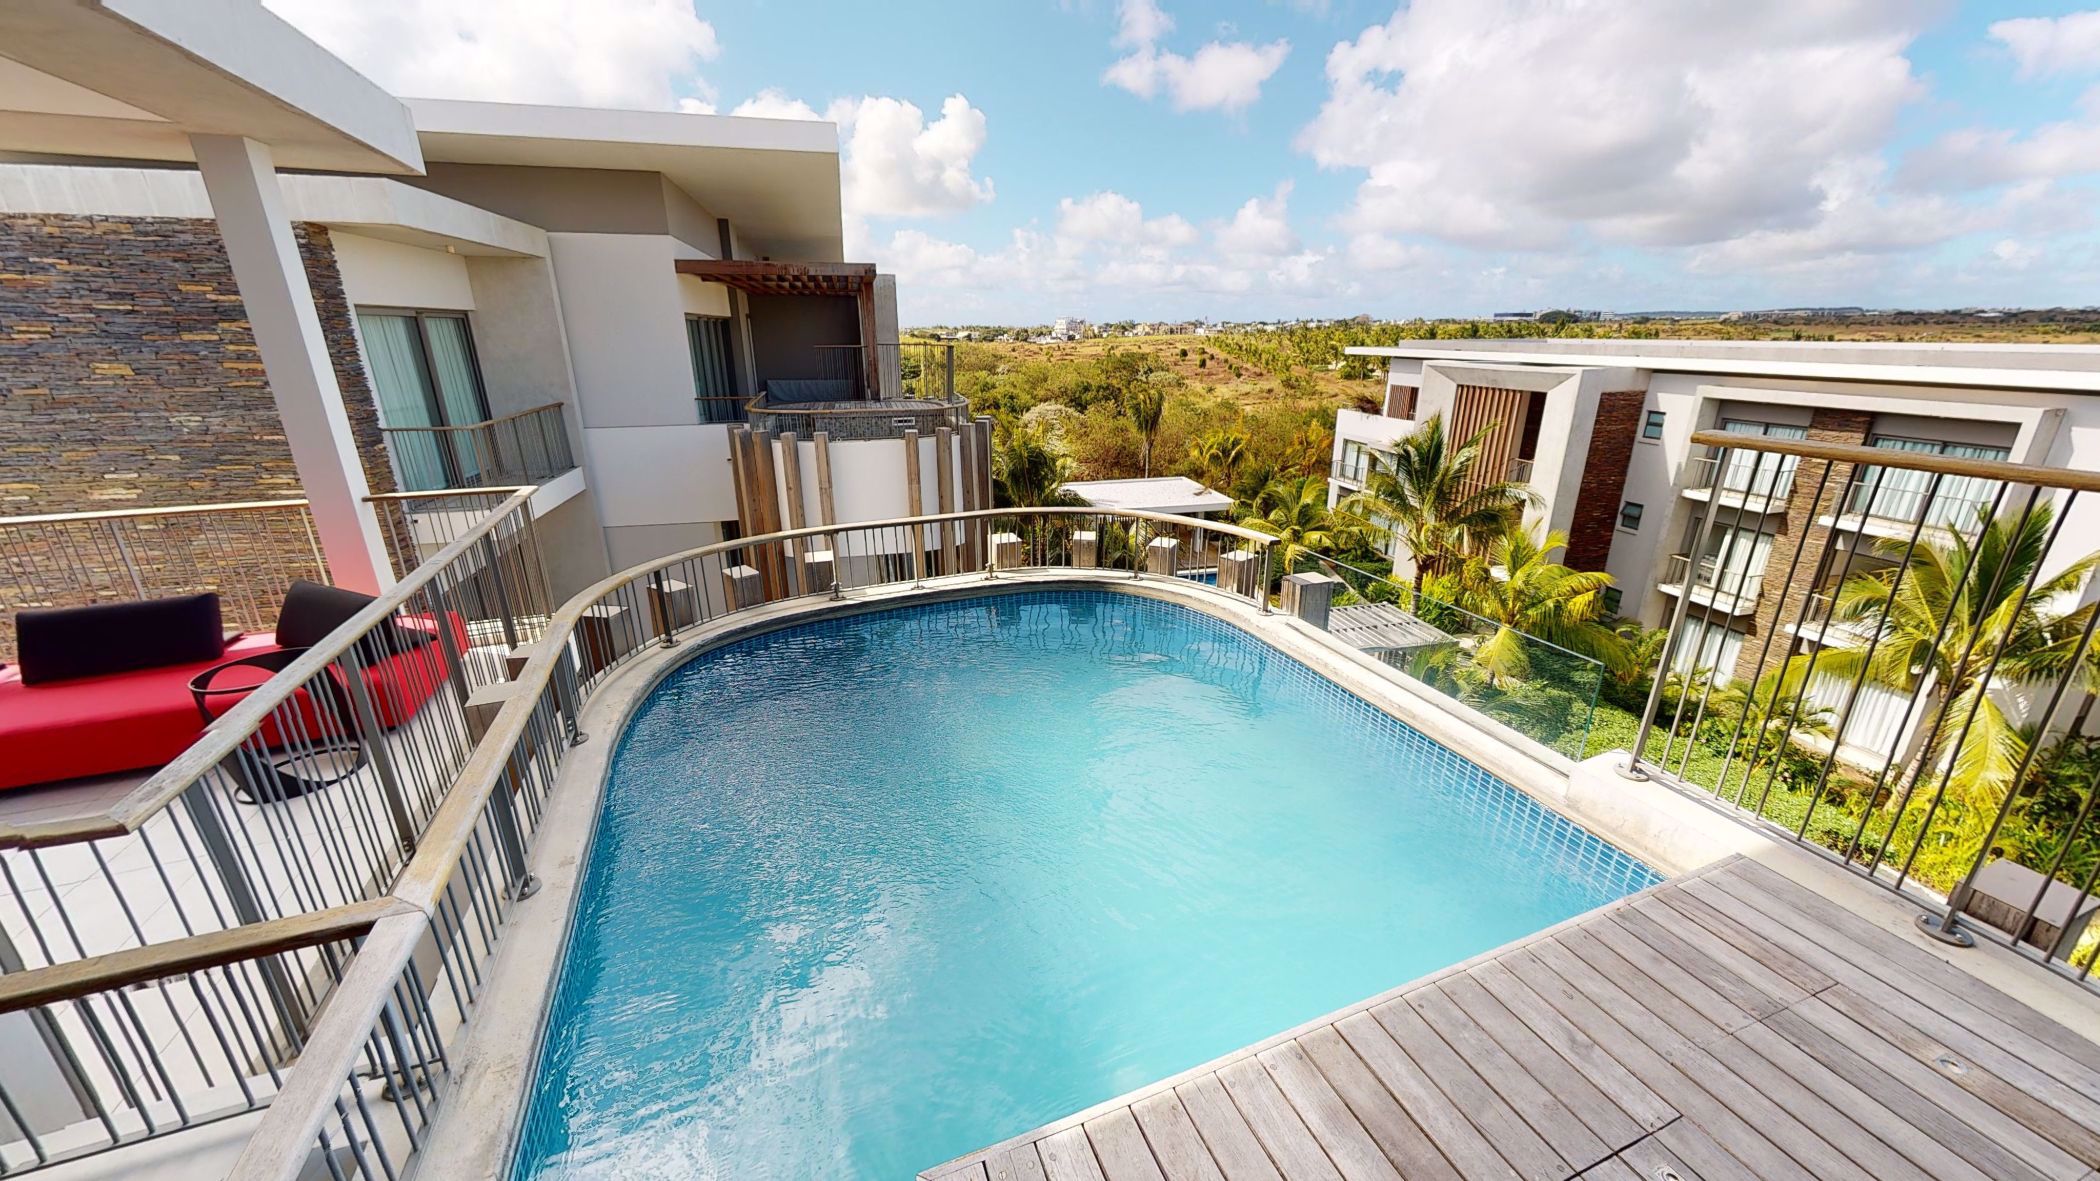 3 bedroom apartment for sale in Grand Baie (Grand Bay) (Mauritius)